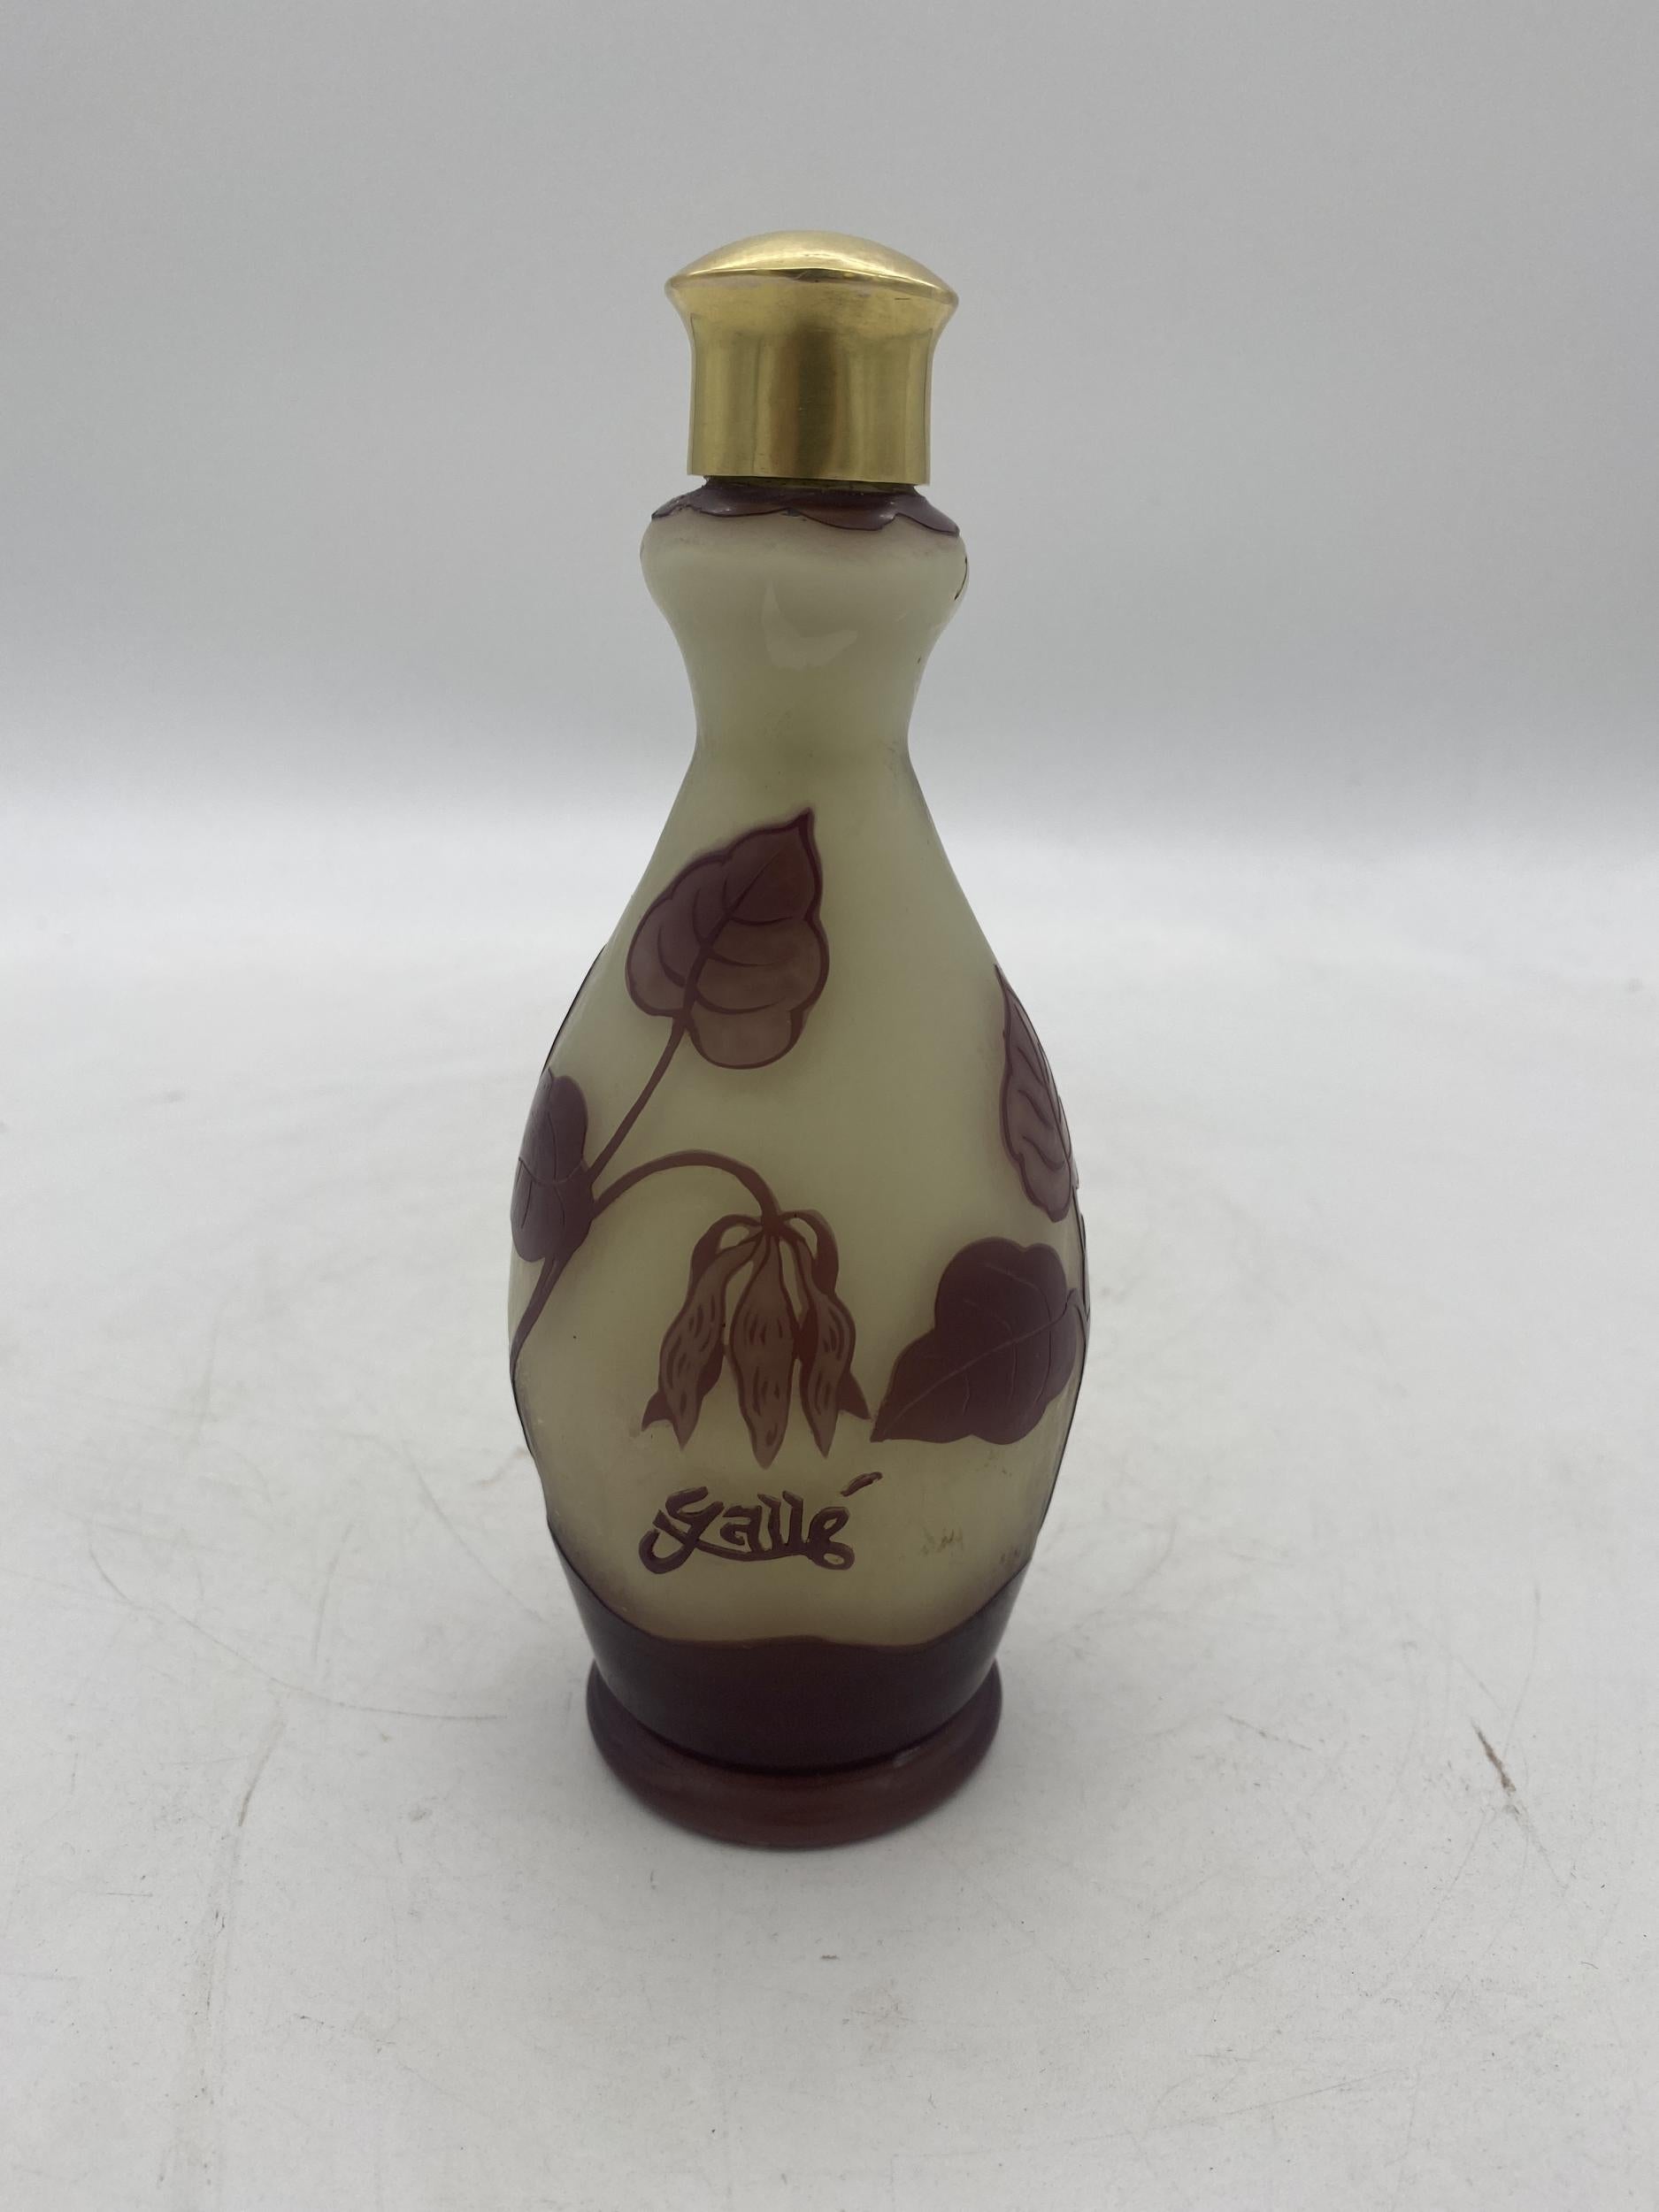 Emile Galle (French 1846-1904)

A lovely two color cameo bottle with a white background featuring foliage through out. The detail and fineness of the acid etching and cameo work is extraordinary and puts this vase into the important category. The